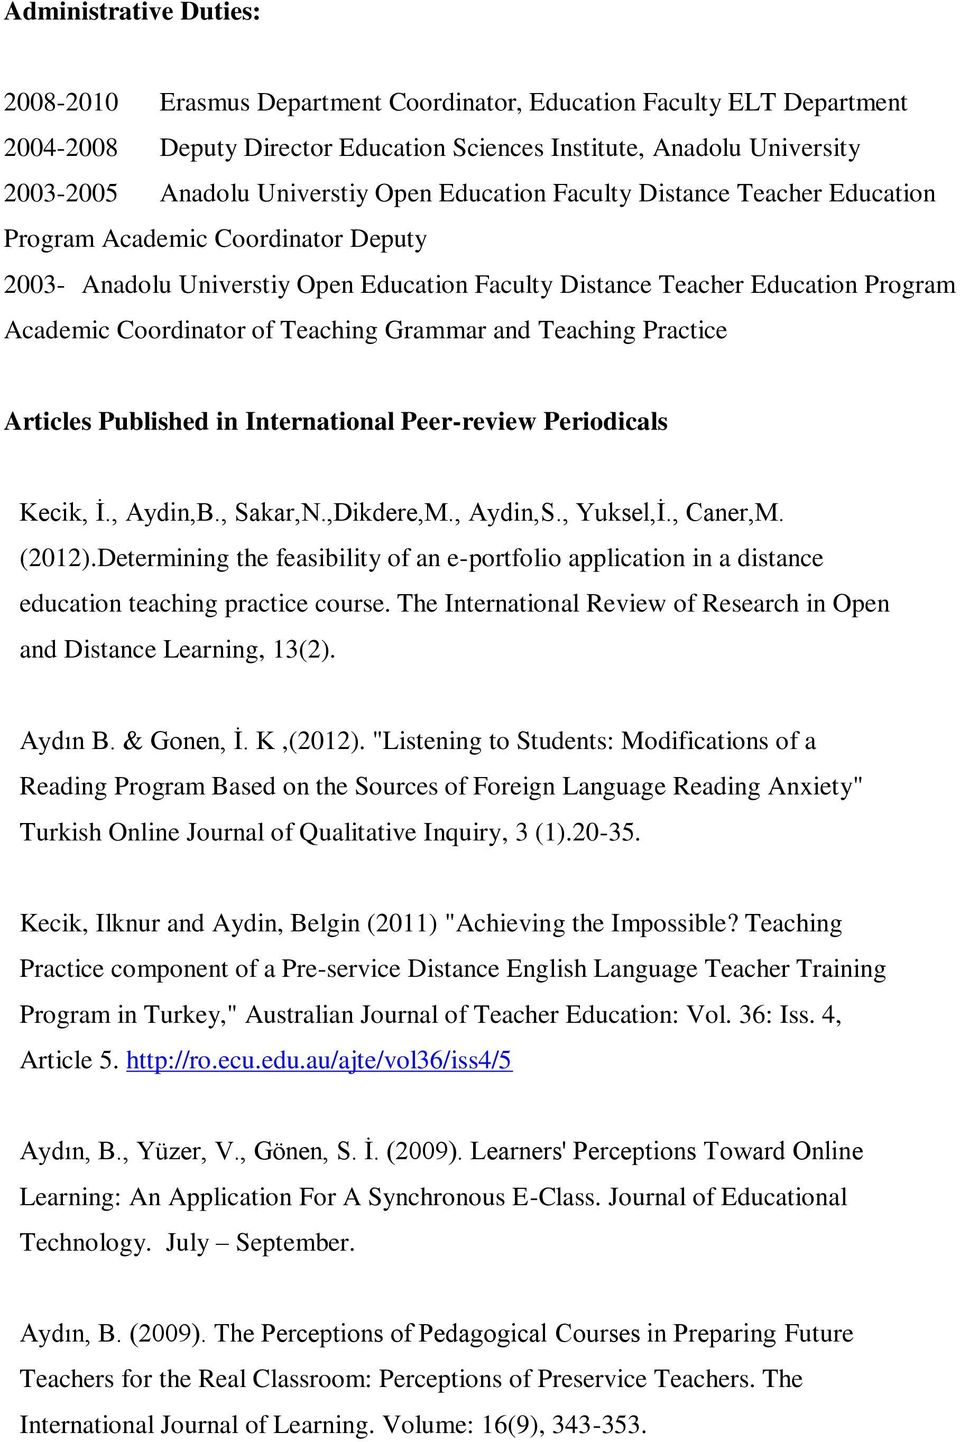 Coordinator of Teaching Grammar and Teaching Practice Articles Published in International Peer-review Periodicals 1. Kecik, İ., Aydin,B., Sakar,N.,Dikdere,M., Aydin,S., Yuksel,İ., Caner,M. (2012).